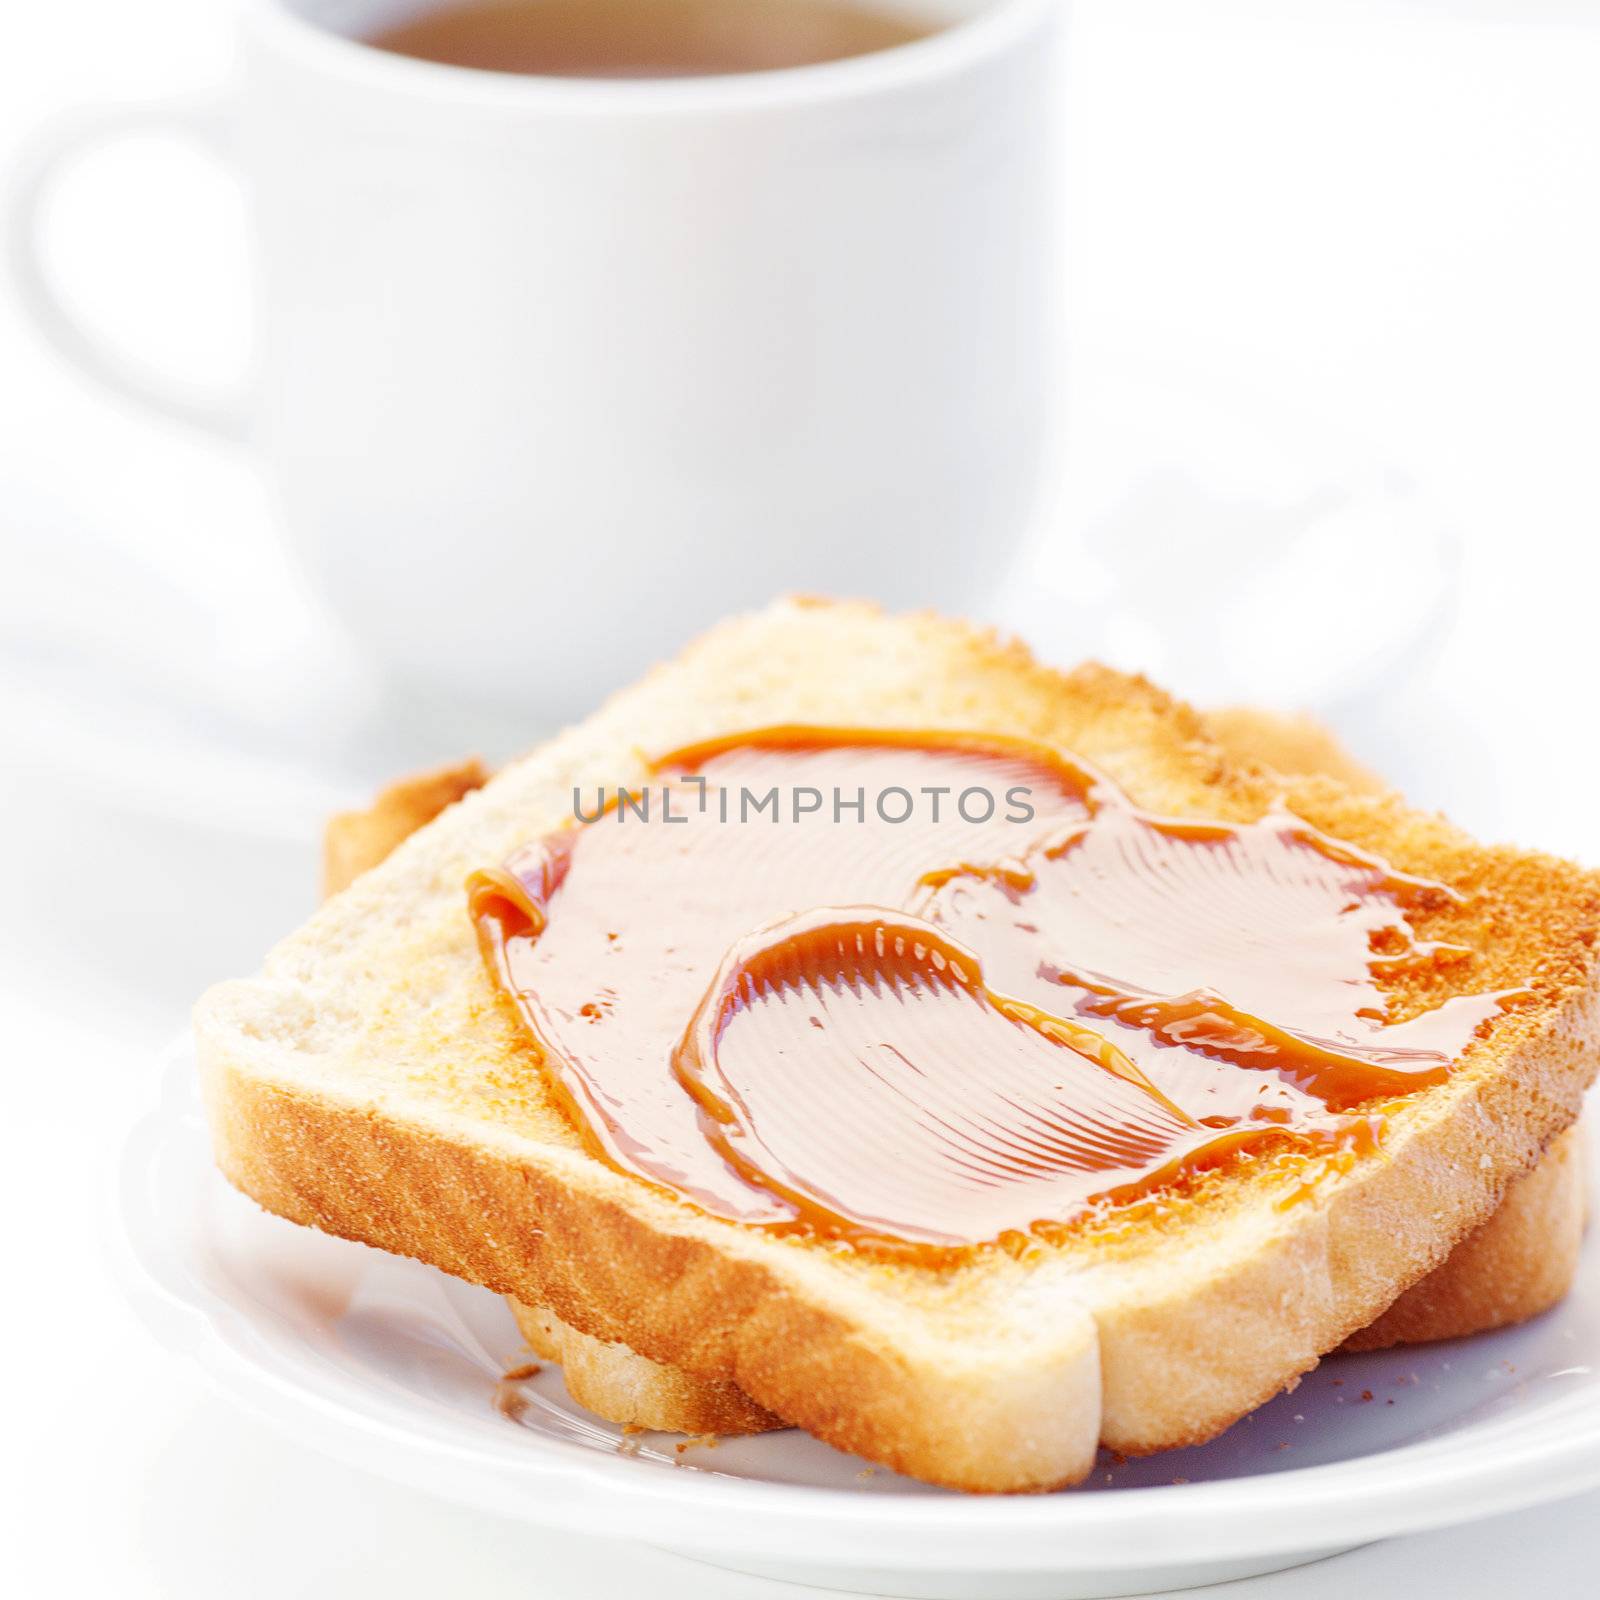 tea and toast with caramel isolated on white